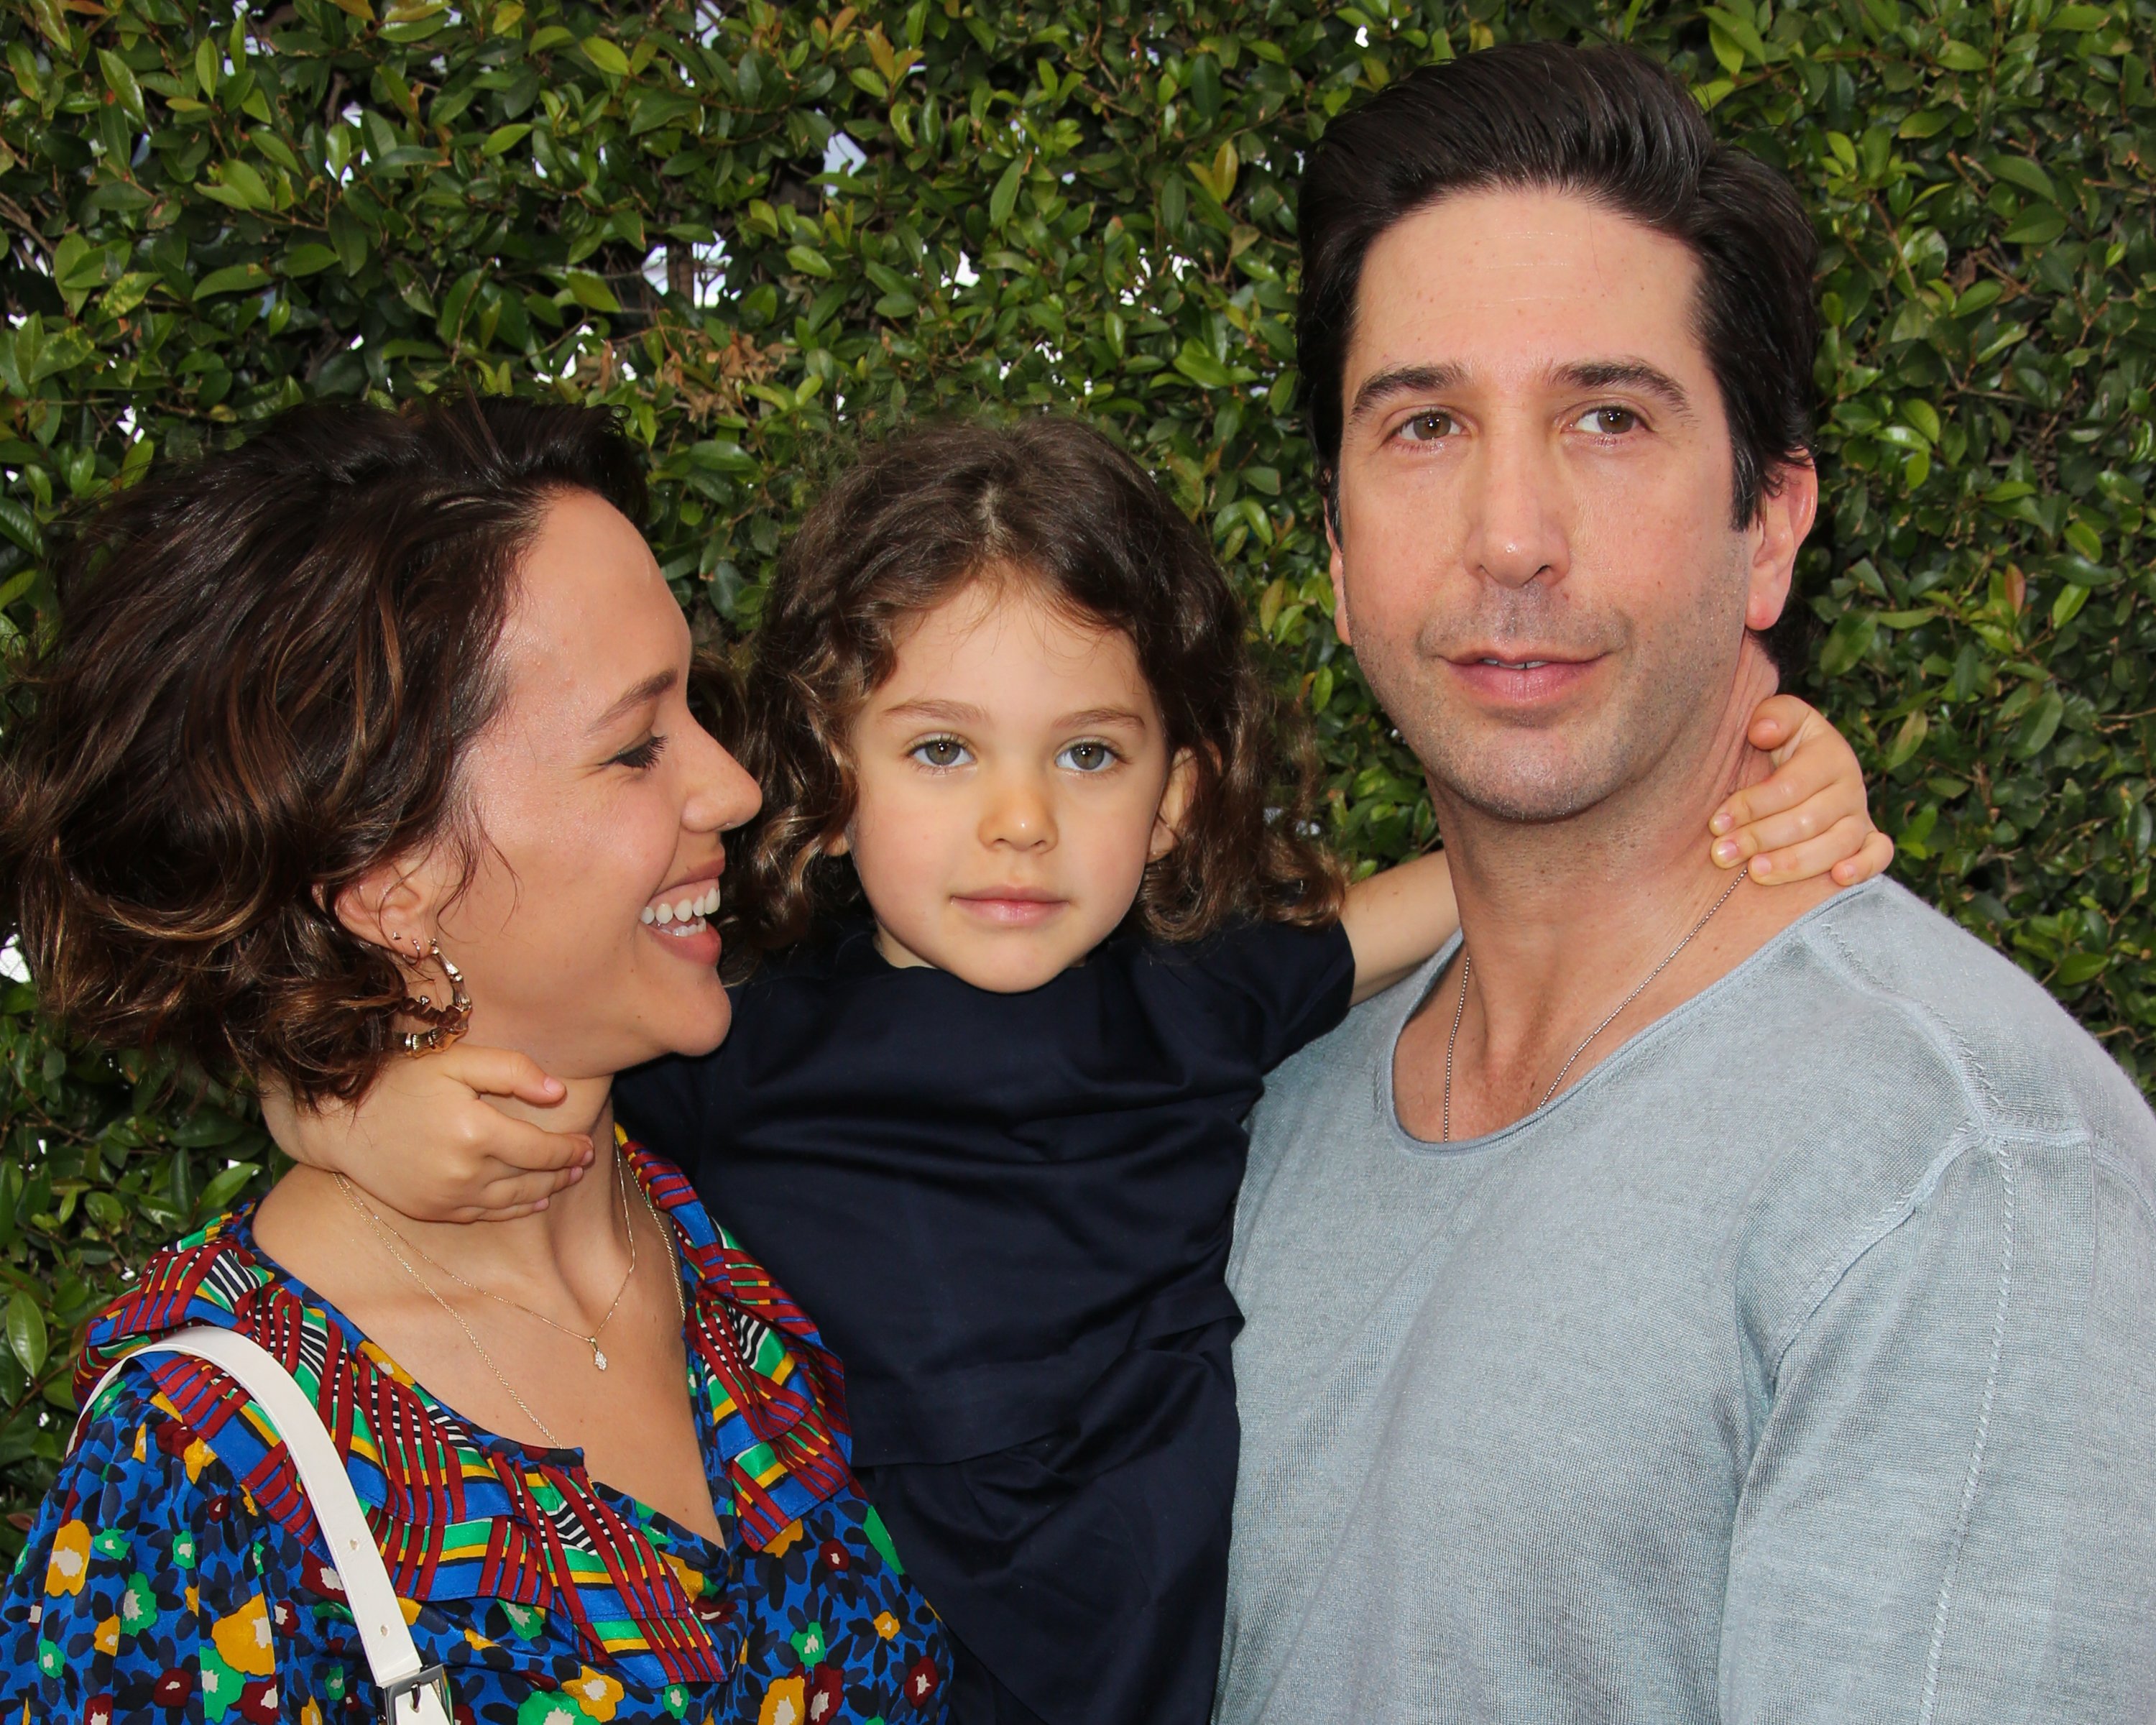 Zoë Buckman, David Schwimmer, and their daughter Cleo Buckman Schwimmer attend the 12th Annual John Varvatos Stuart House Benefit on April 26, 2015, in Los Angeles, California. | Source: Getty Images